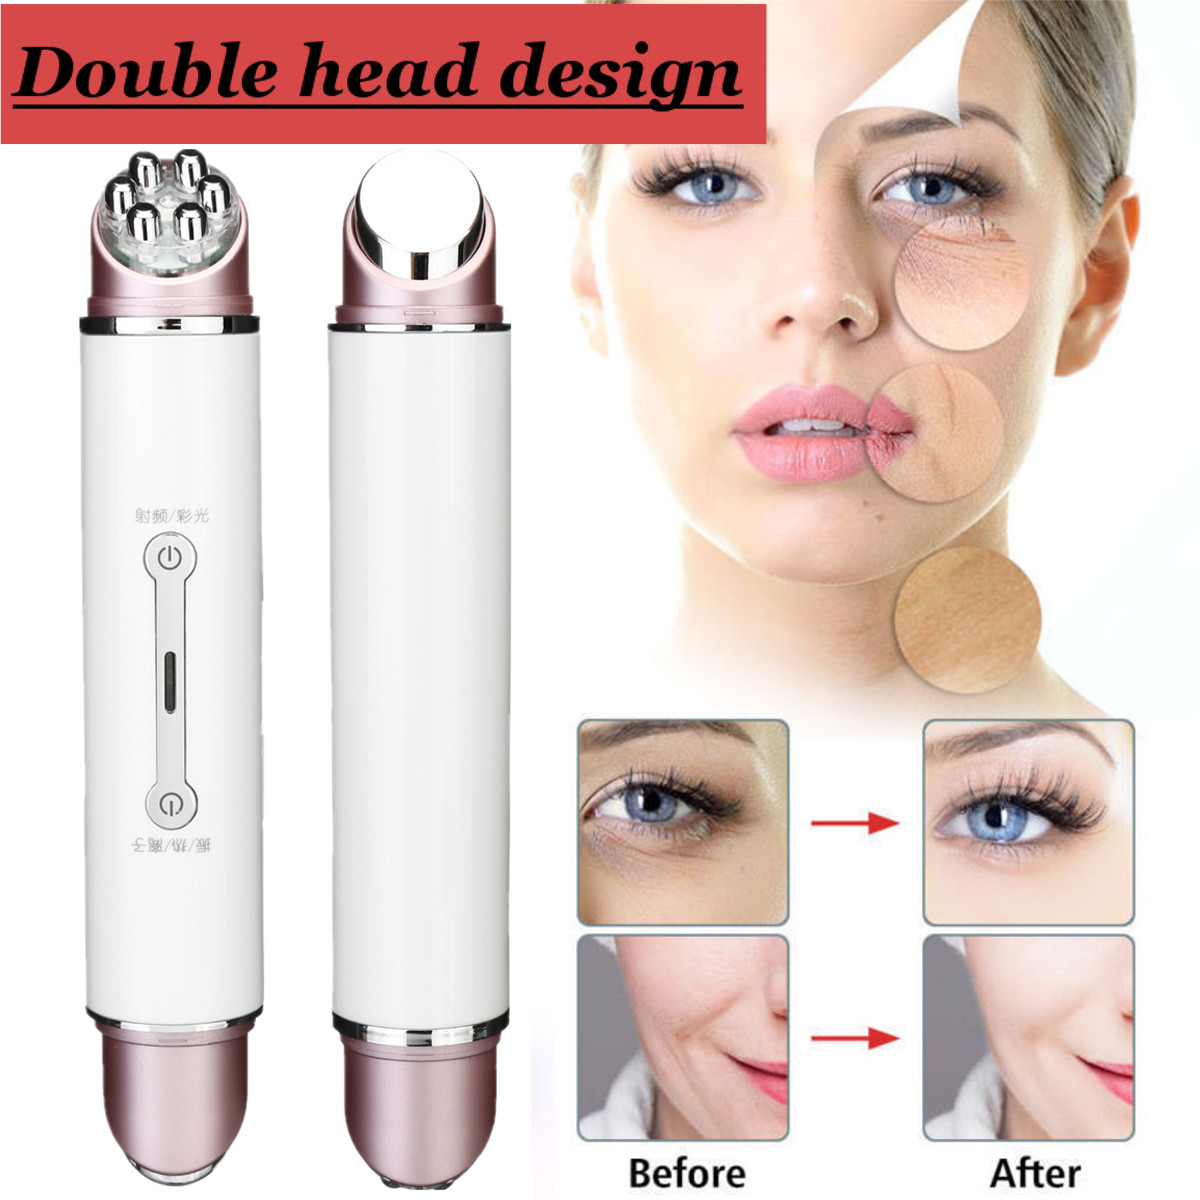 Double Head RF & EMS Radio Frequency Mesotherapy Electroporation Face Wrinkle Remove Pen Frequency Photon Face Skin Rejuvenation